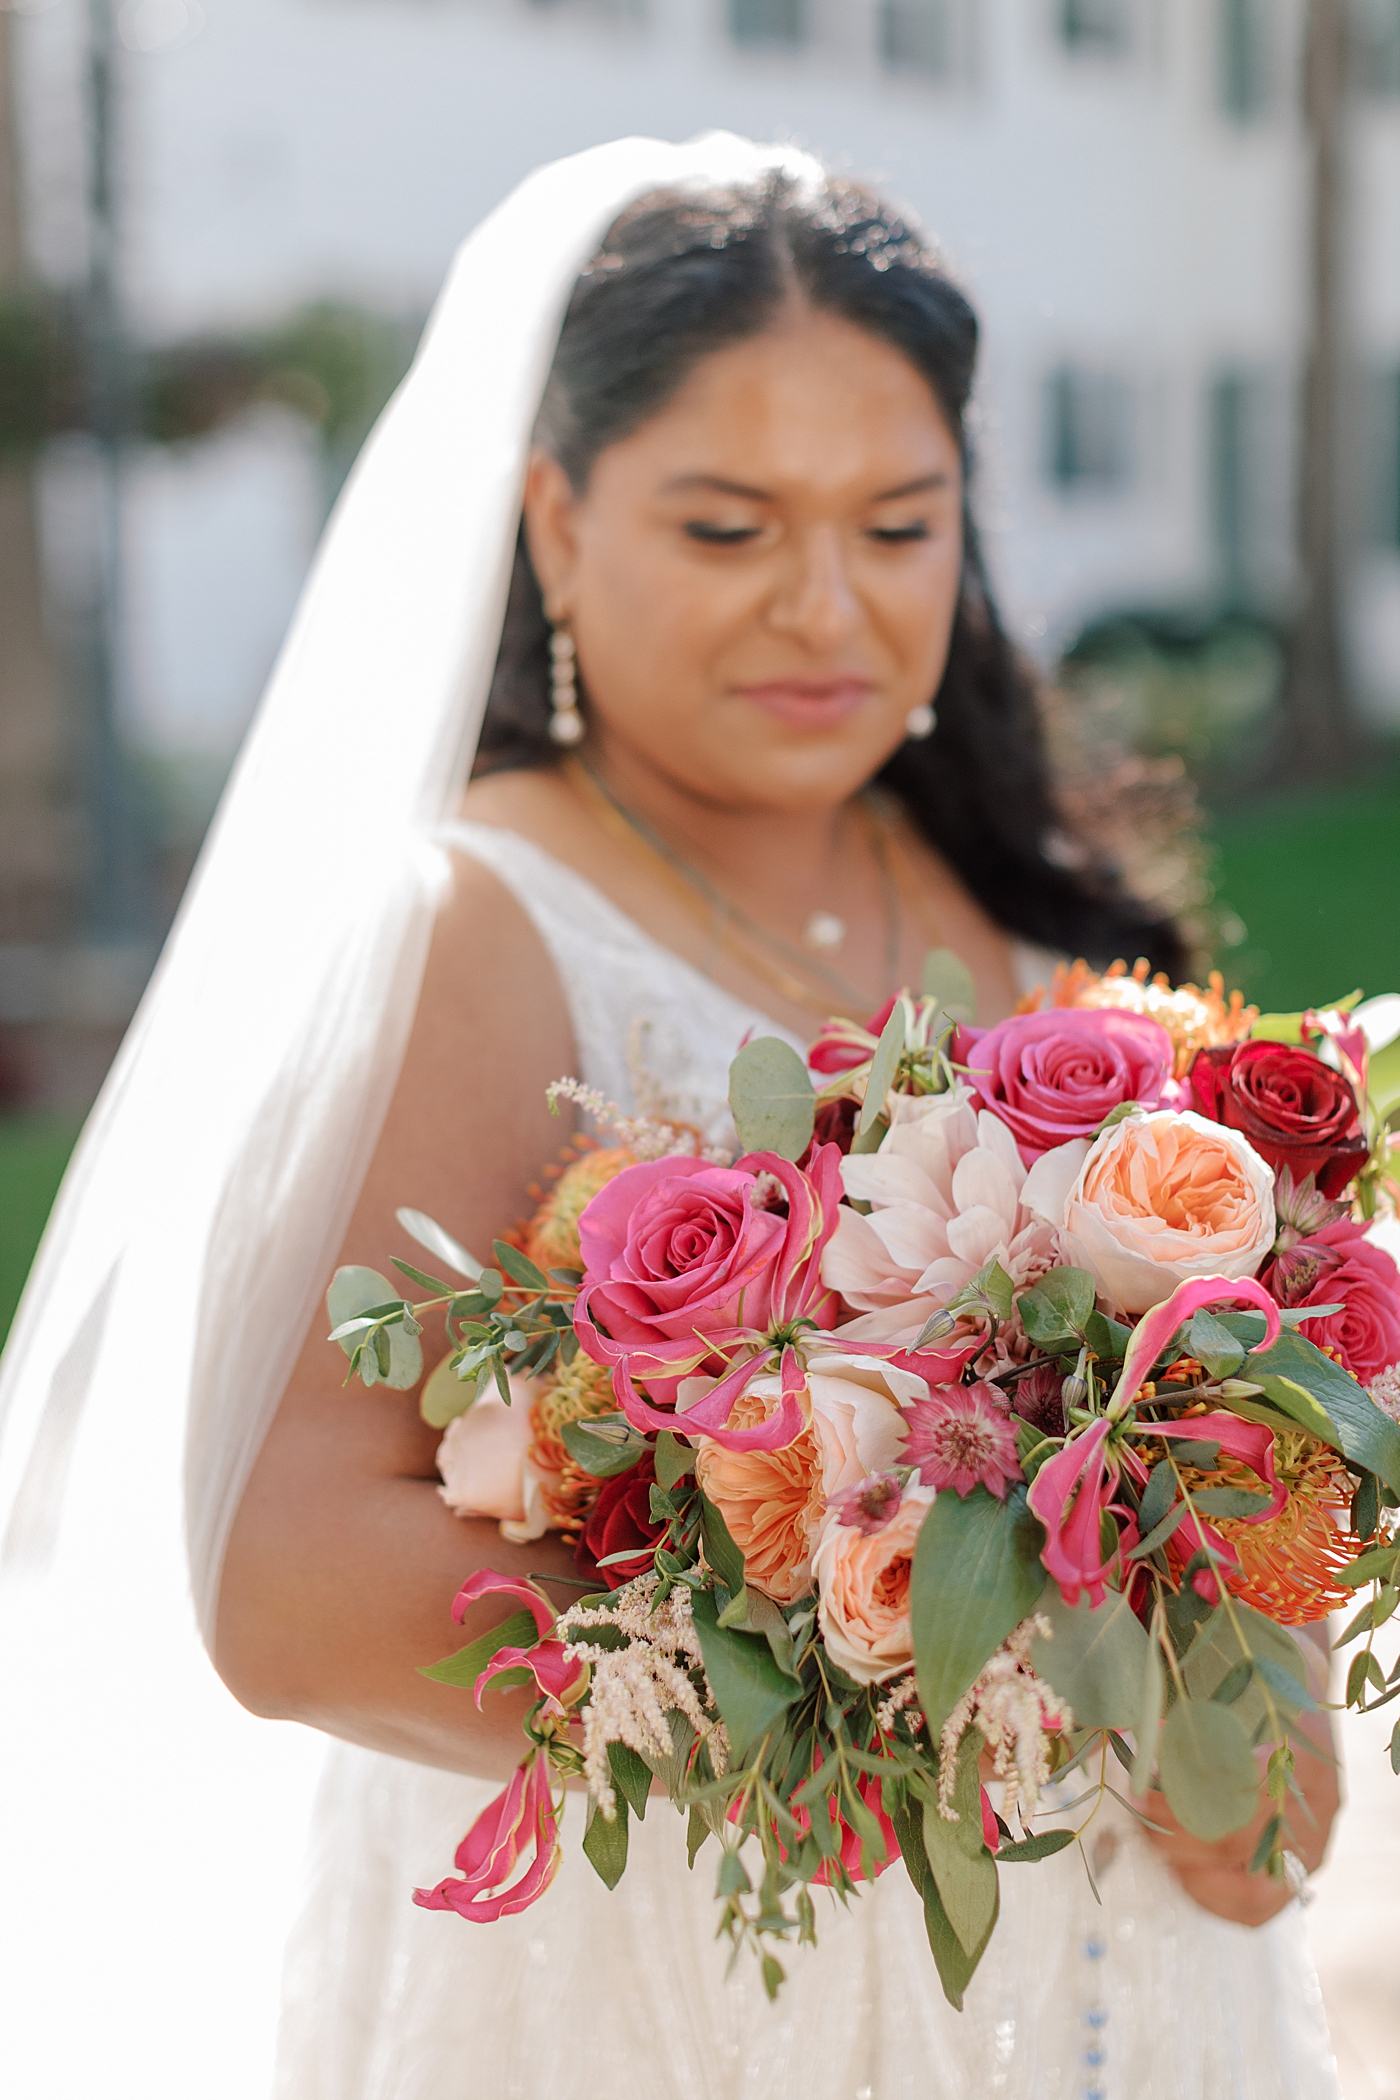 Close up image of a bride with her colorful bridal bouquet | Image by Hope Helmuth Photography